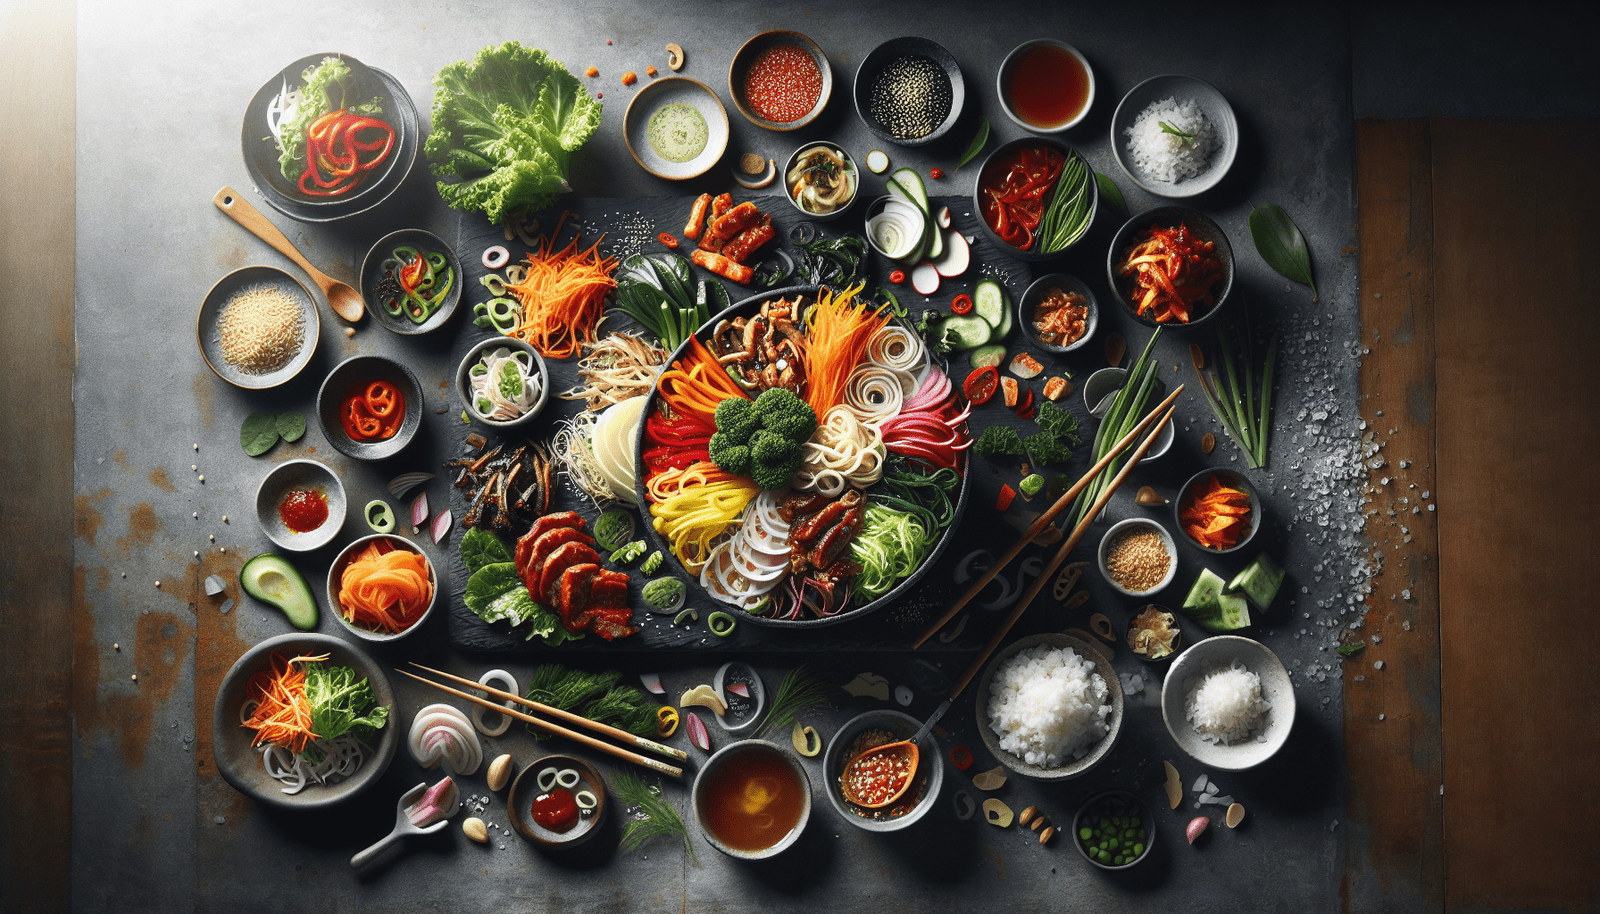 Can You Share Ideas For Deconstructed Korean Dishes With A Modern Twist?